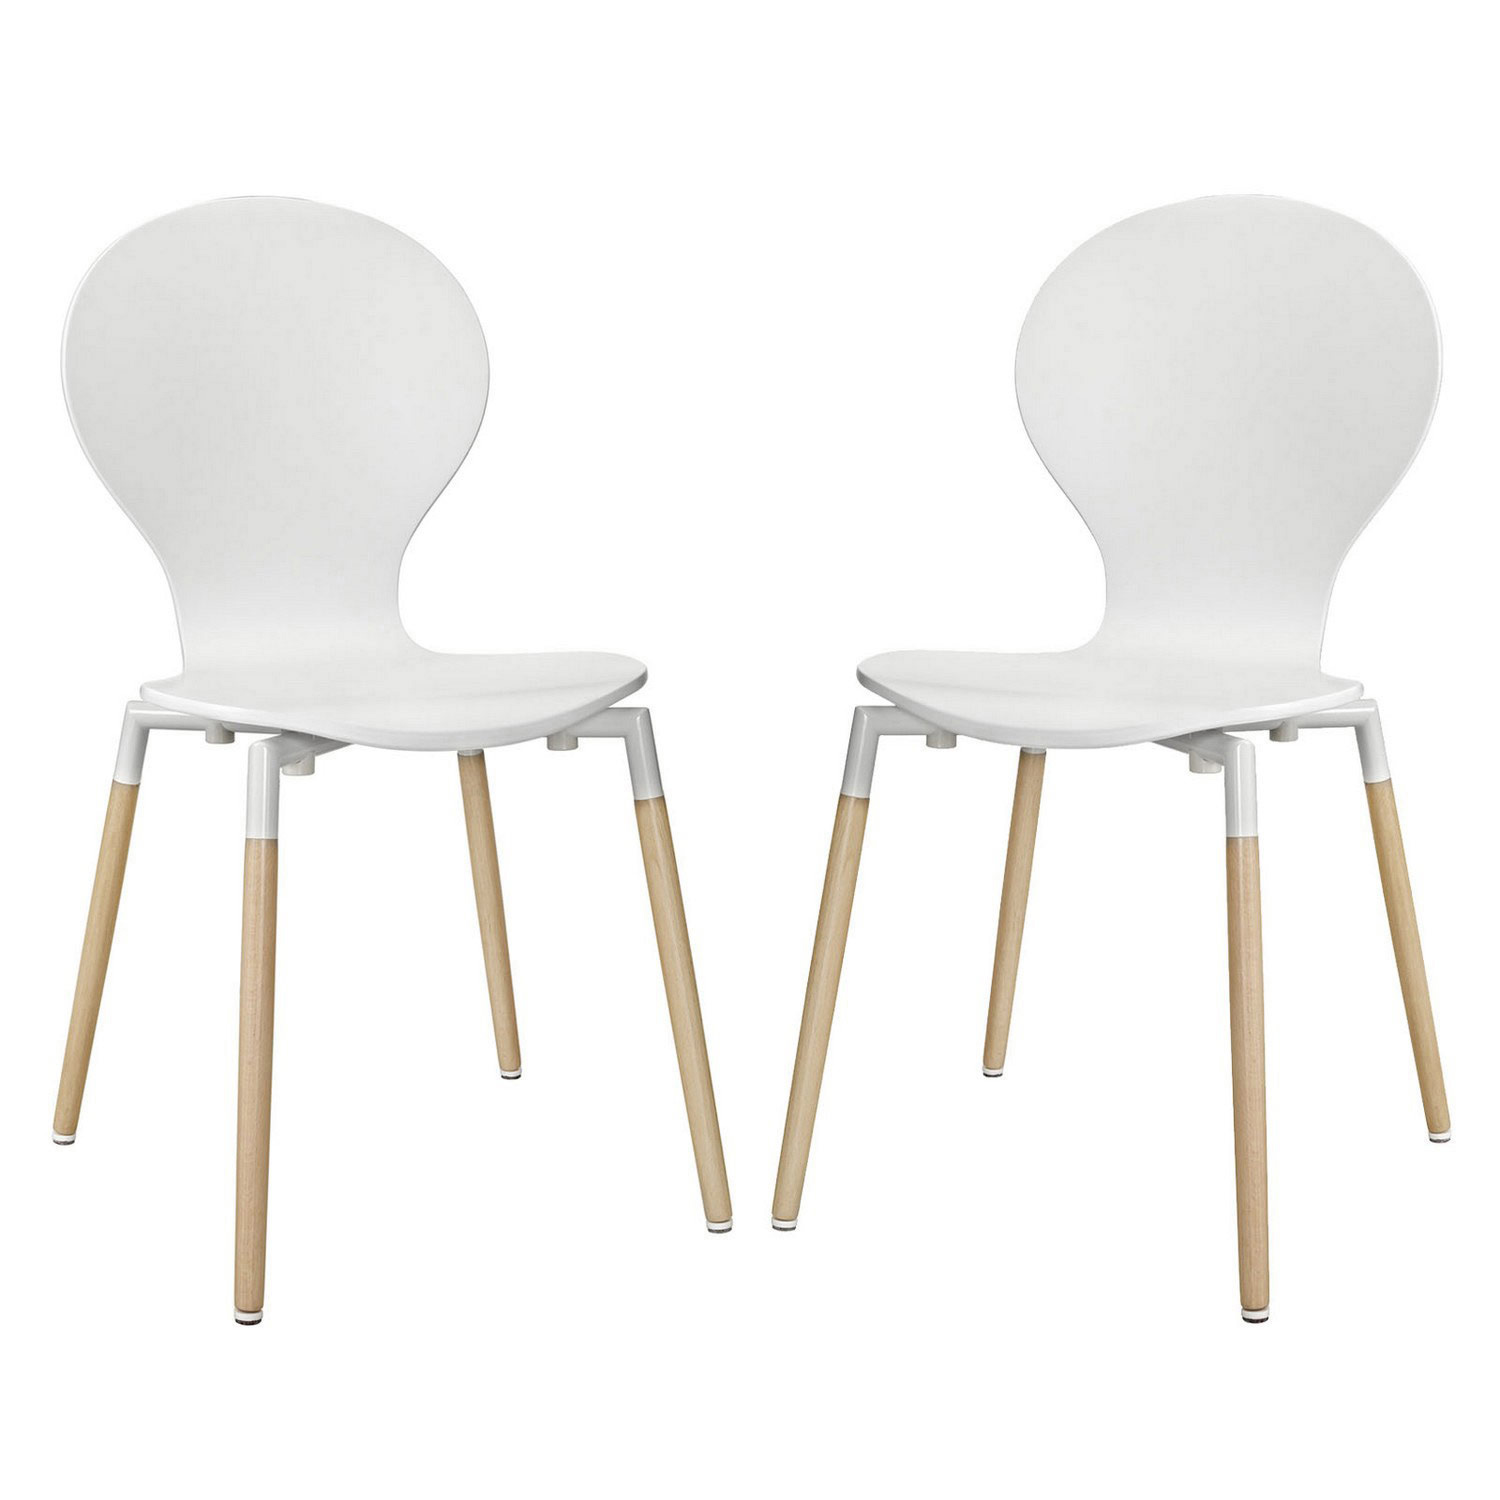 Modway Path Dining Chair Set of 2 - White